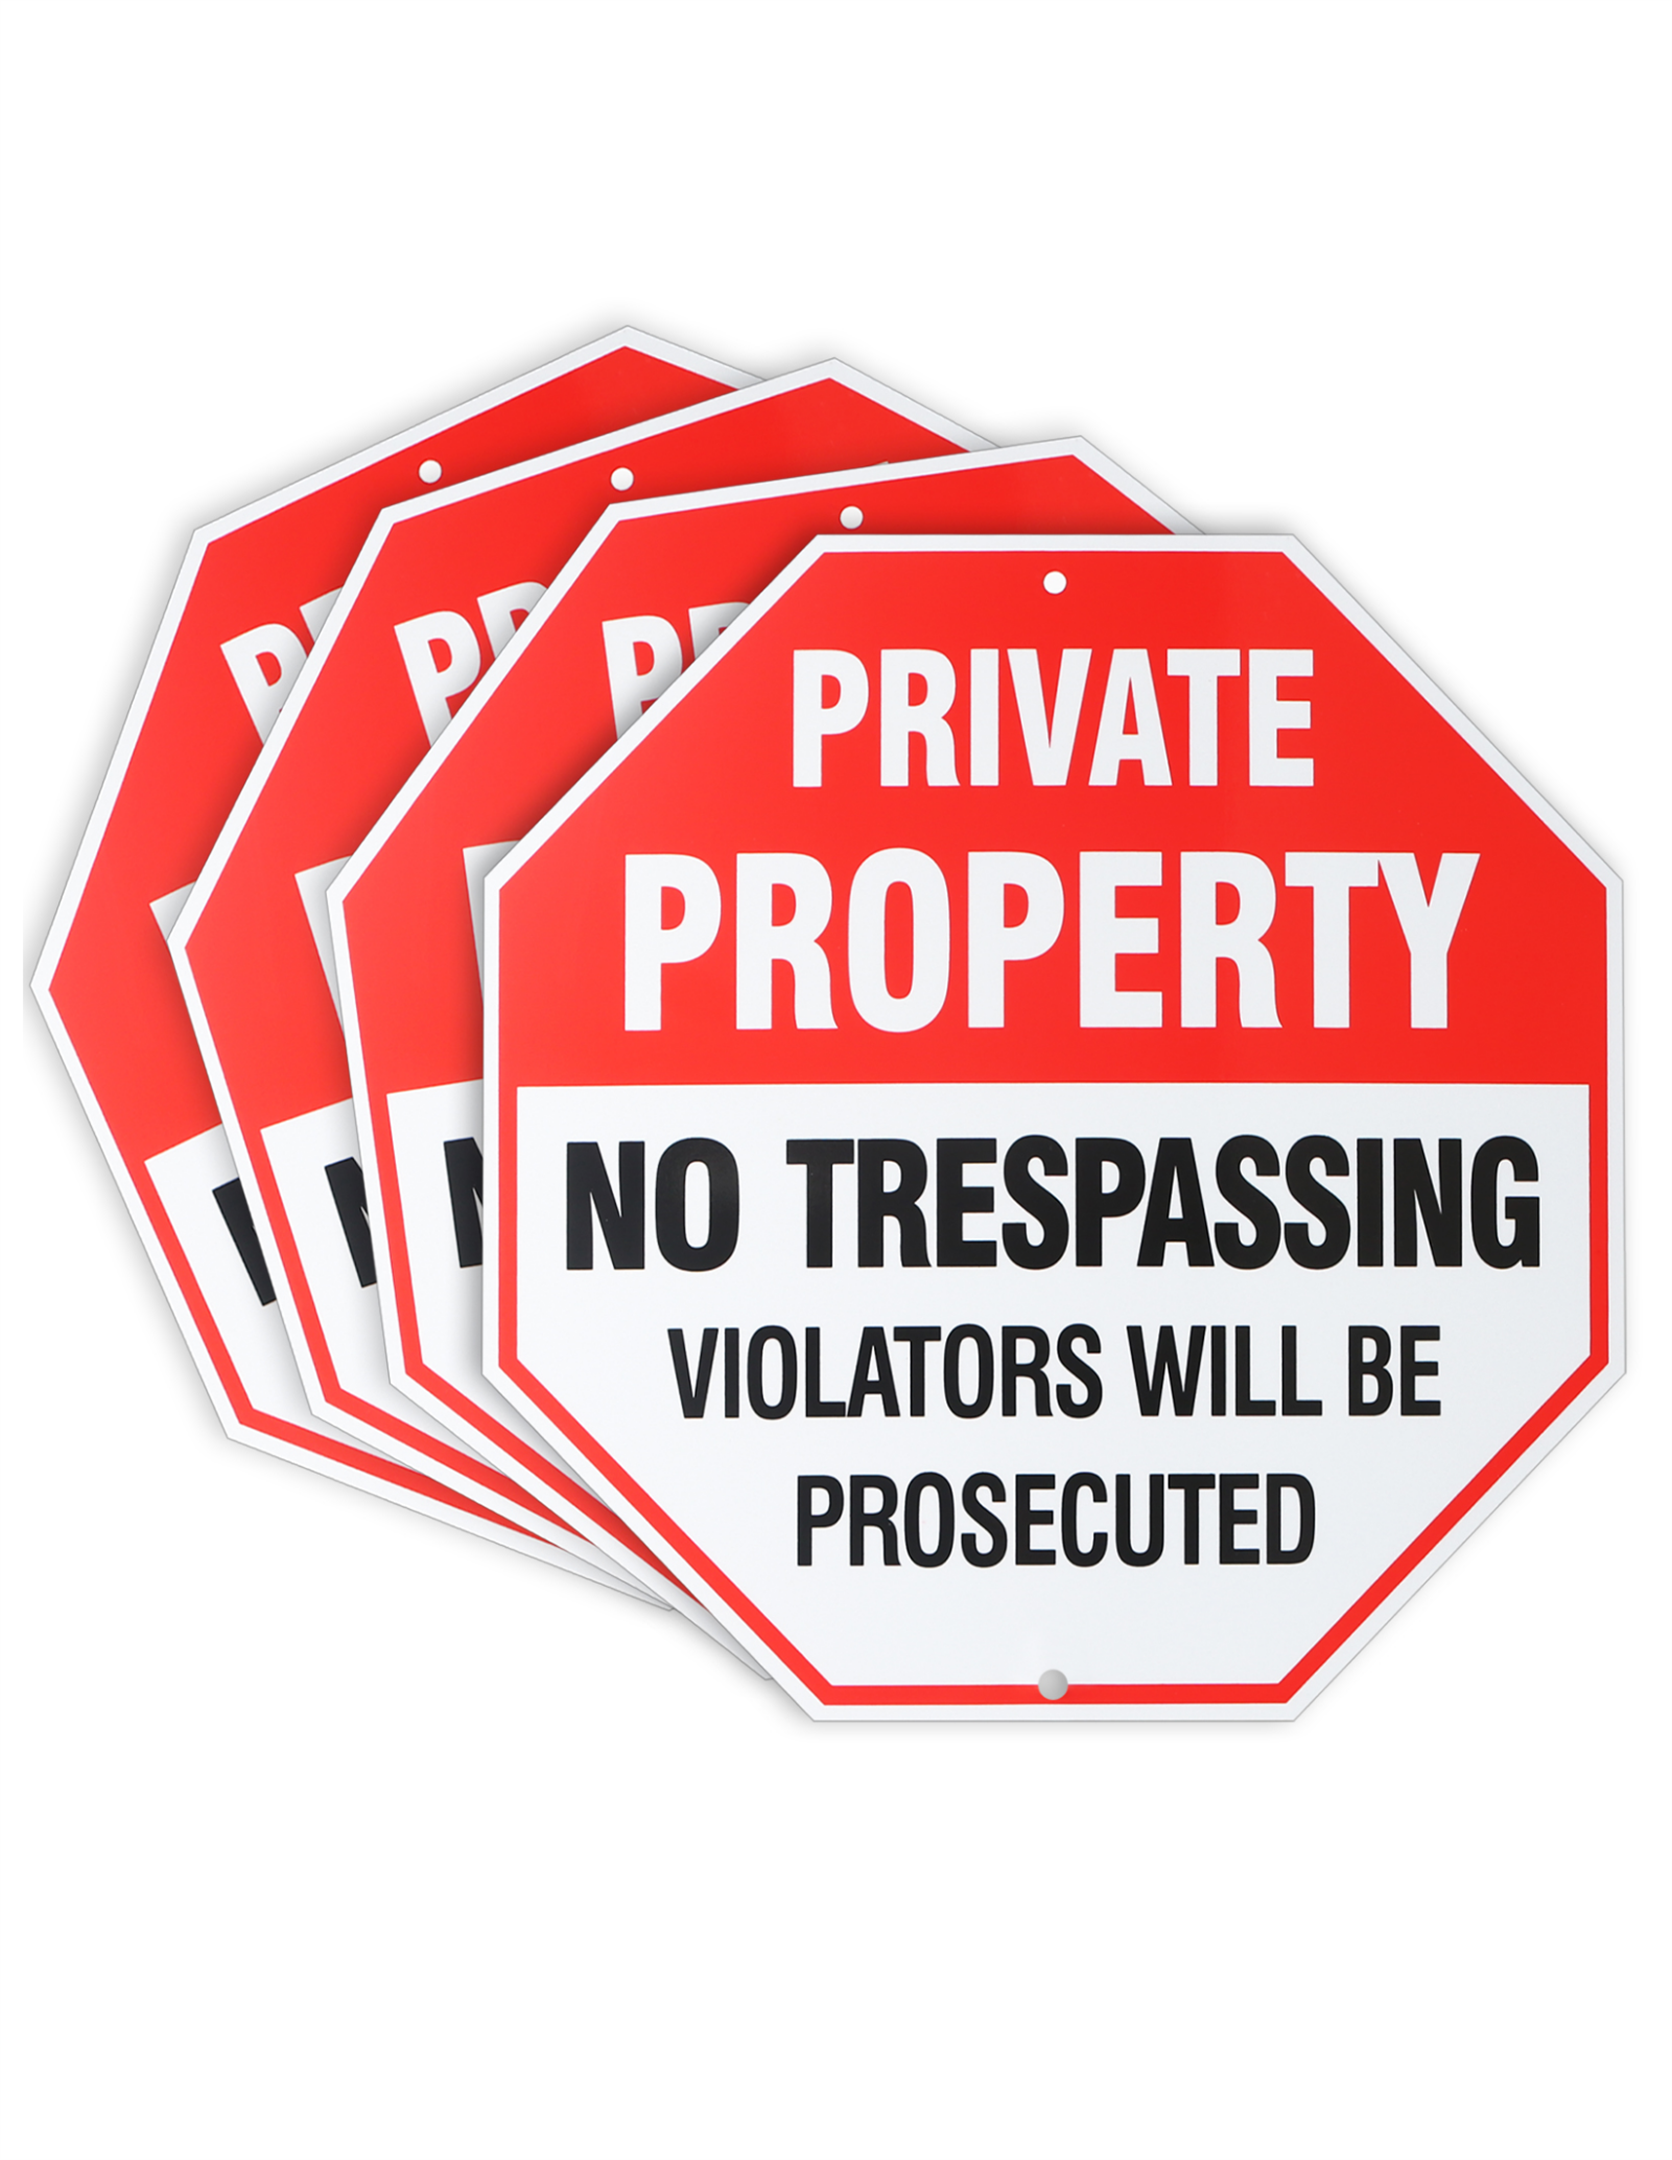 Thten Private Property Sign No Trespassing Violators Will be prosecuted,12" x 12" Waterproof,Security Signs for House, Business,Driveway to Keep Out Trespassers,Suitable for Outdoor Indoor Use